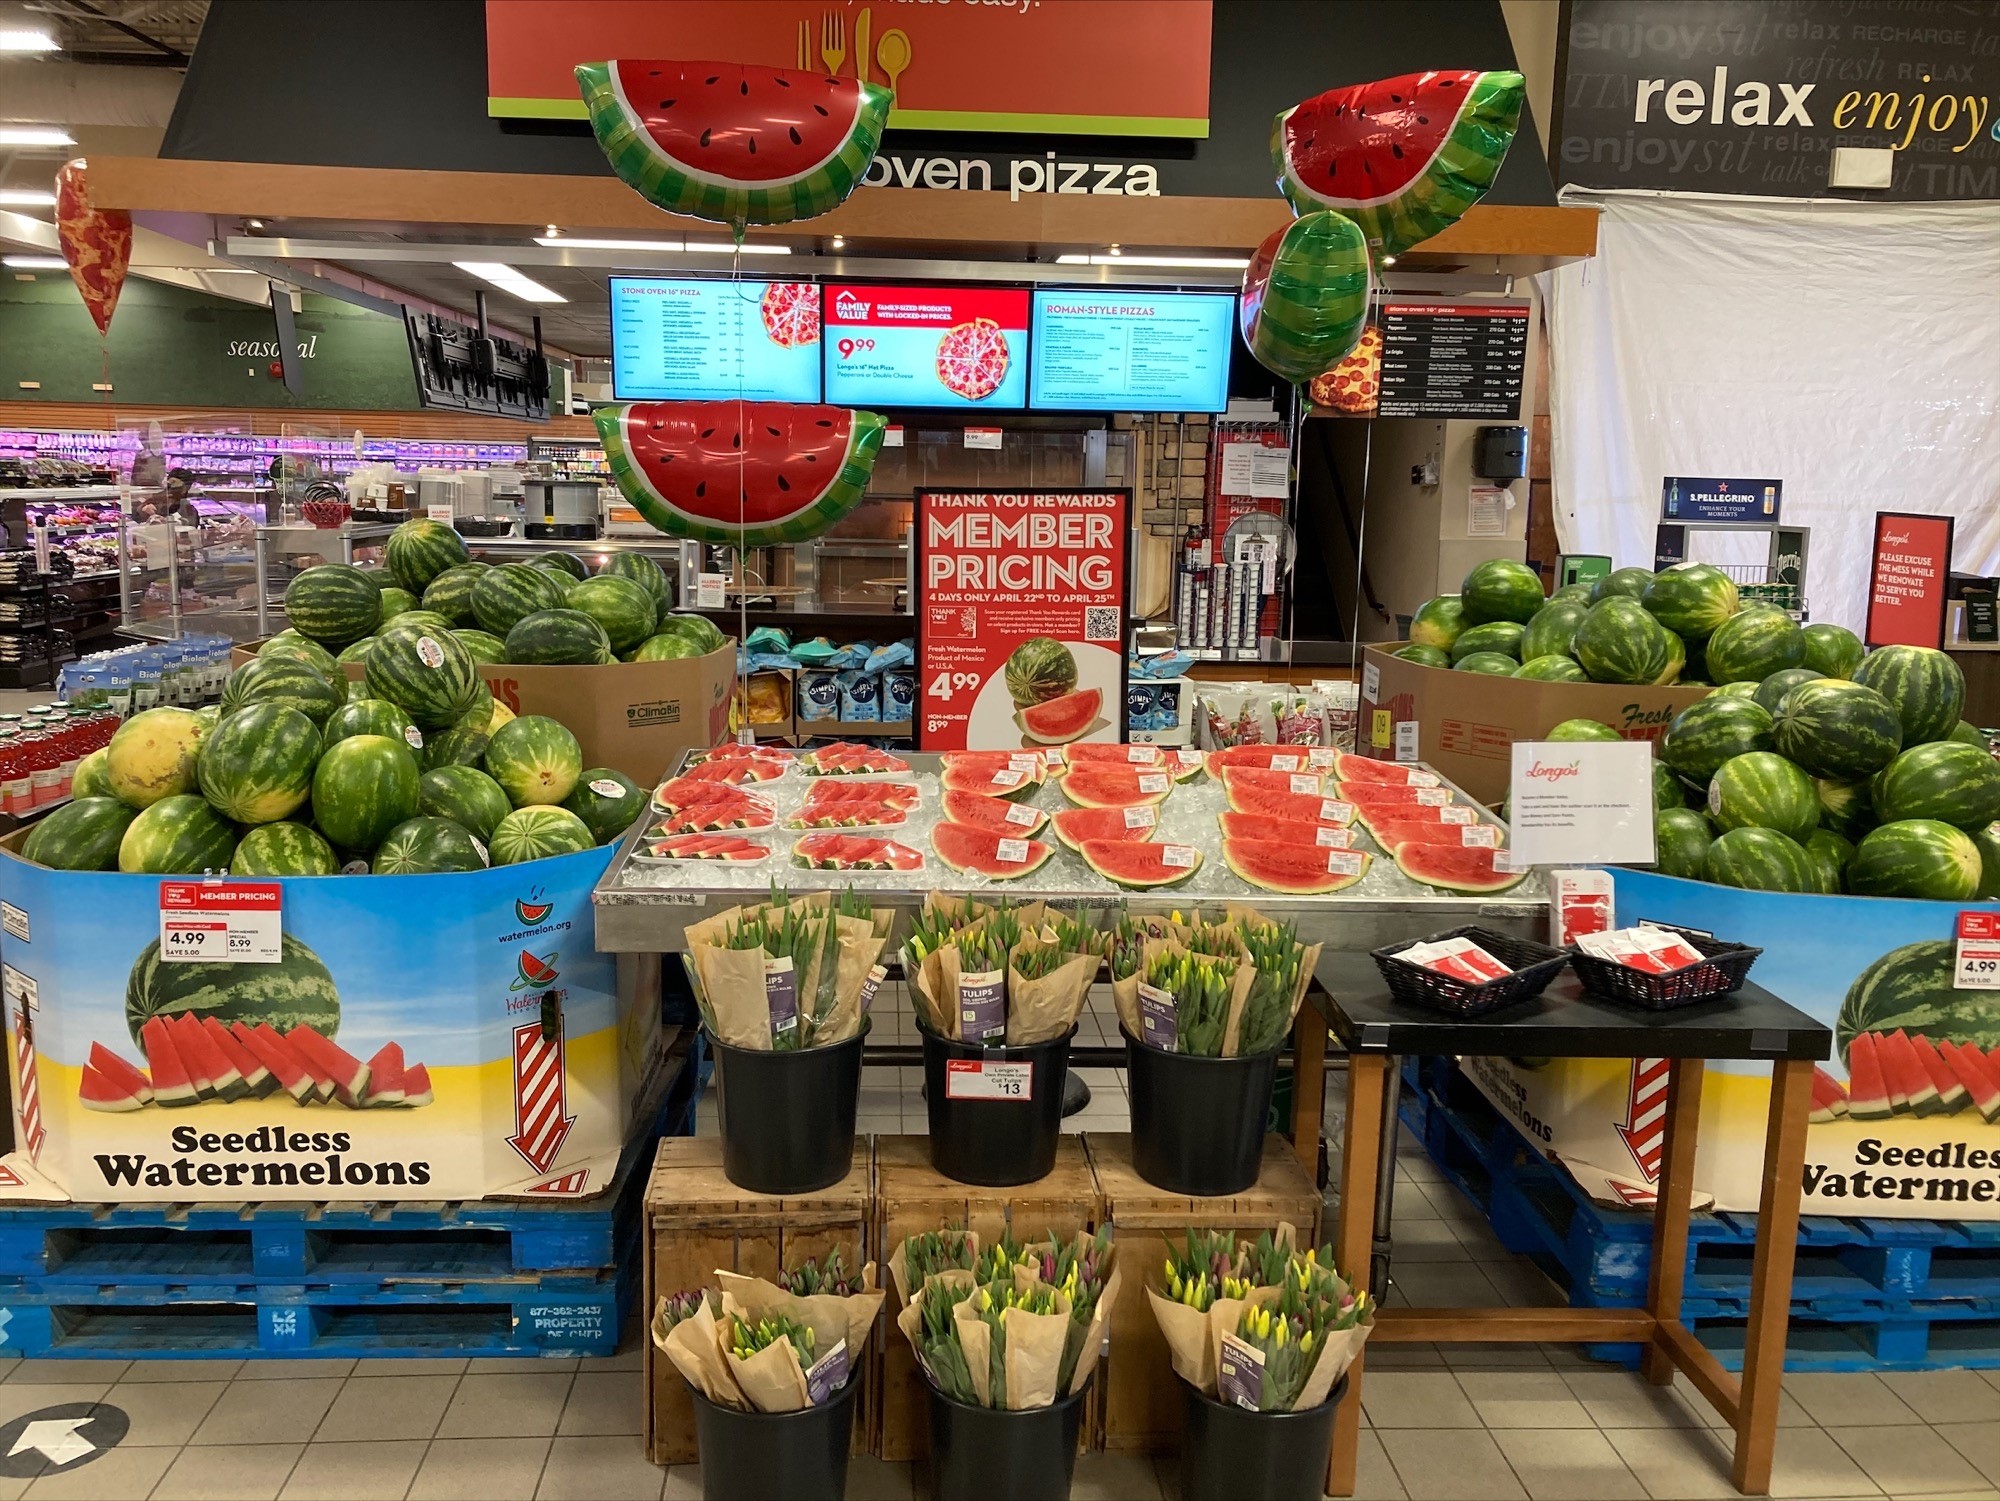  We do love a good, sweet watermelon. The colorful balloons add the right touch of whimsy. Ice keeps the fresh-cut melons crisp and cold, ensuring consumers can nom on the sweet melons the moment they get home. 